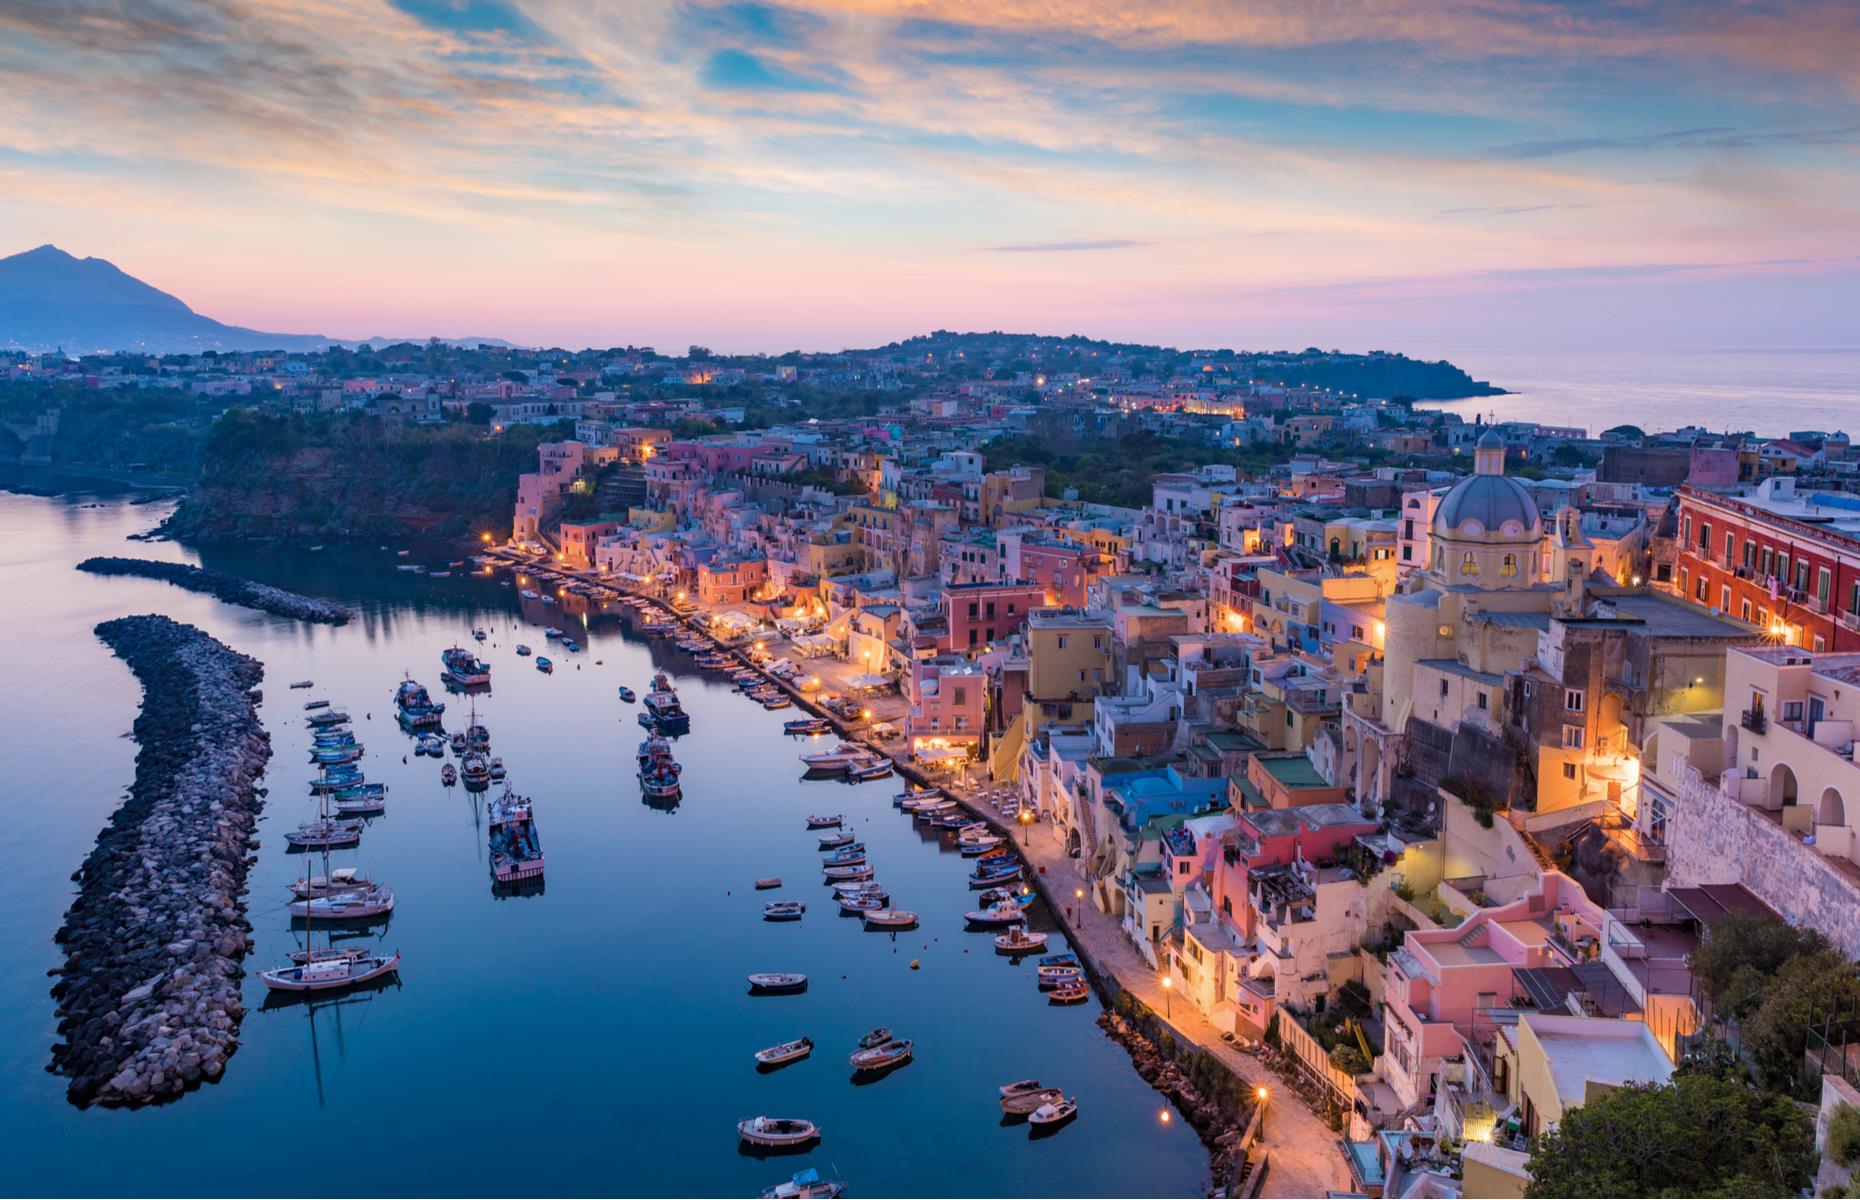 <p>A quaint spot nestled in a bay on the small island of Procida, off the west coast of Naples, Marina Corricella is recognisable for its adorable multicoloured houses. The 17th-century port is best-known for its stunning architecture and it’s not hard to see why, with decorative domes, arches, terraces, windows and balconies creating a colourful view from above. These are <a href="https://www.loveexploring.com/galleries/76327/the-most-beautiful-small-towns-in-the-world">the world's most beautiful small towns</a>.</p>